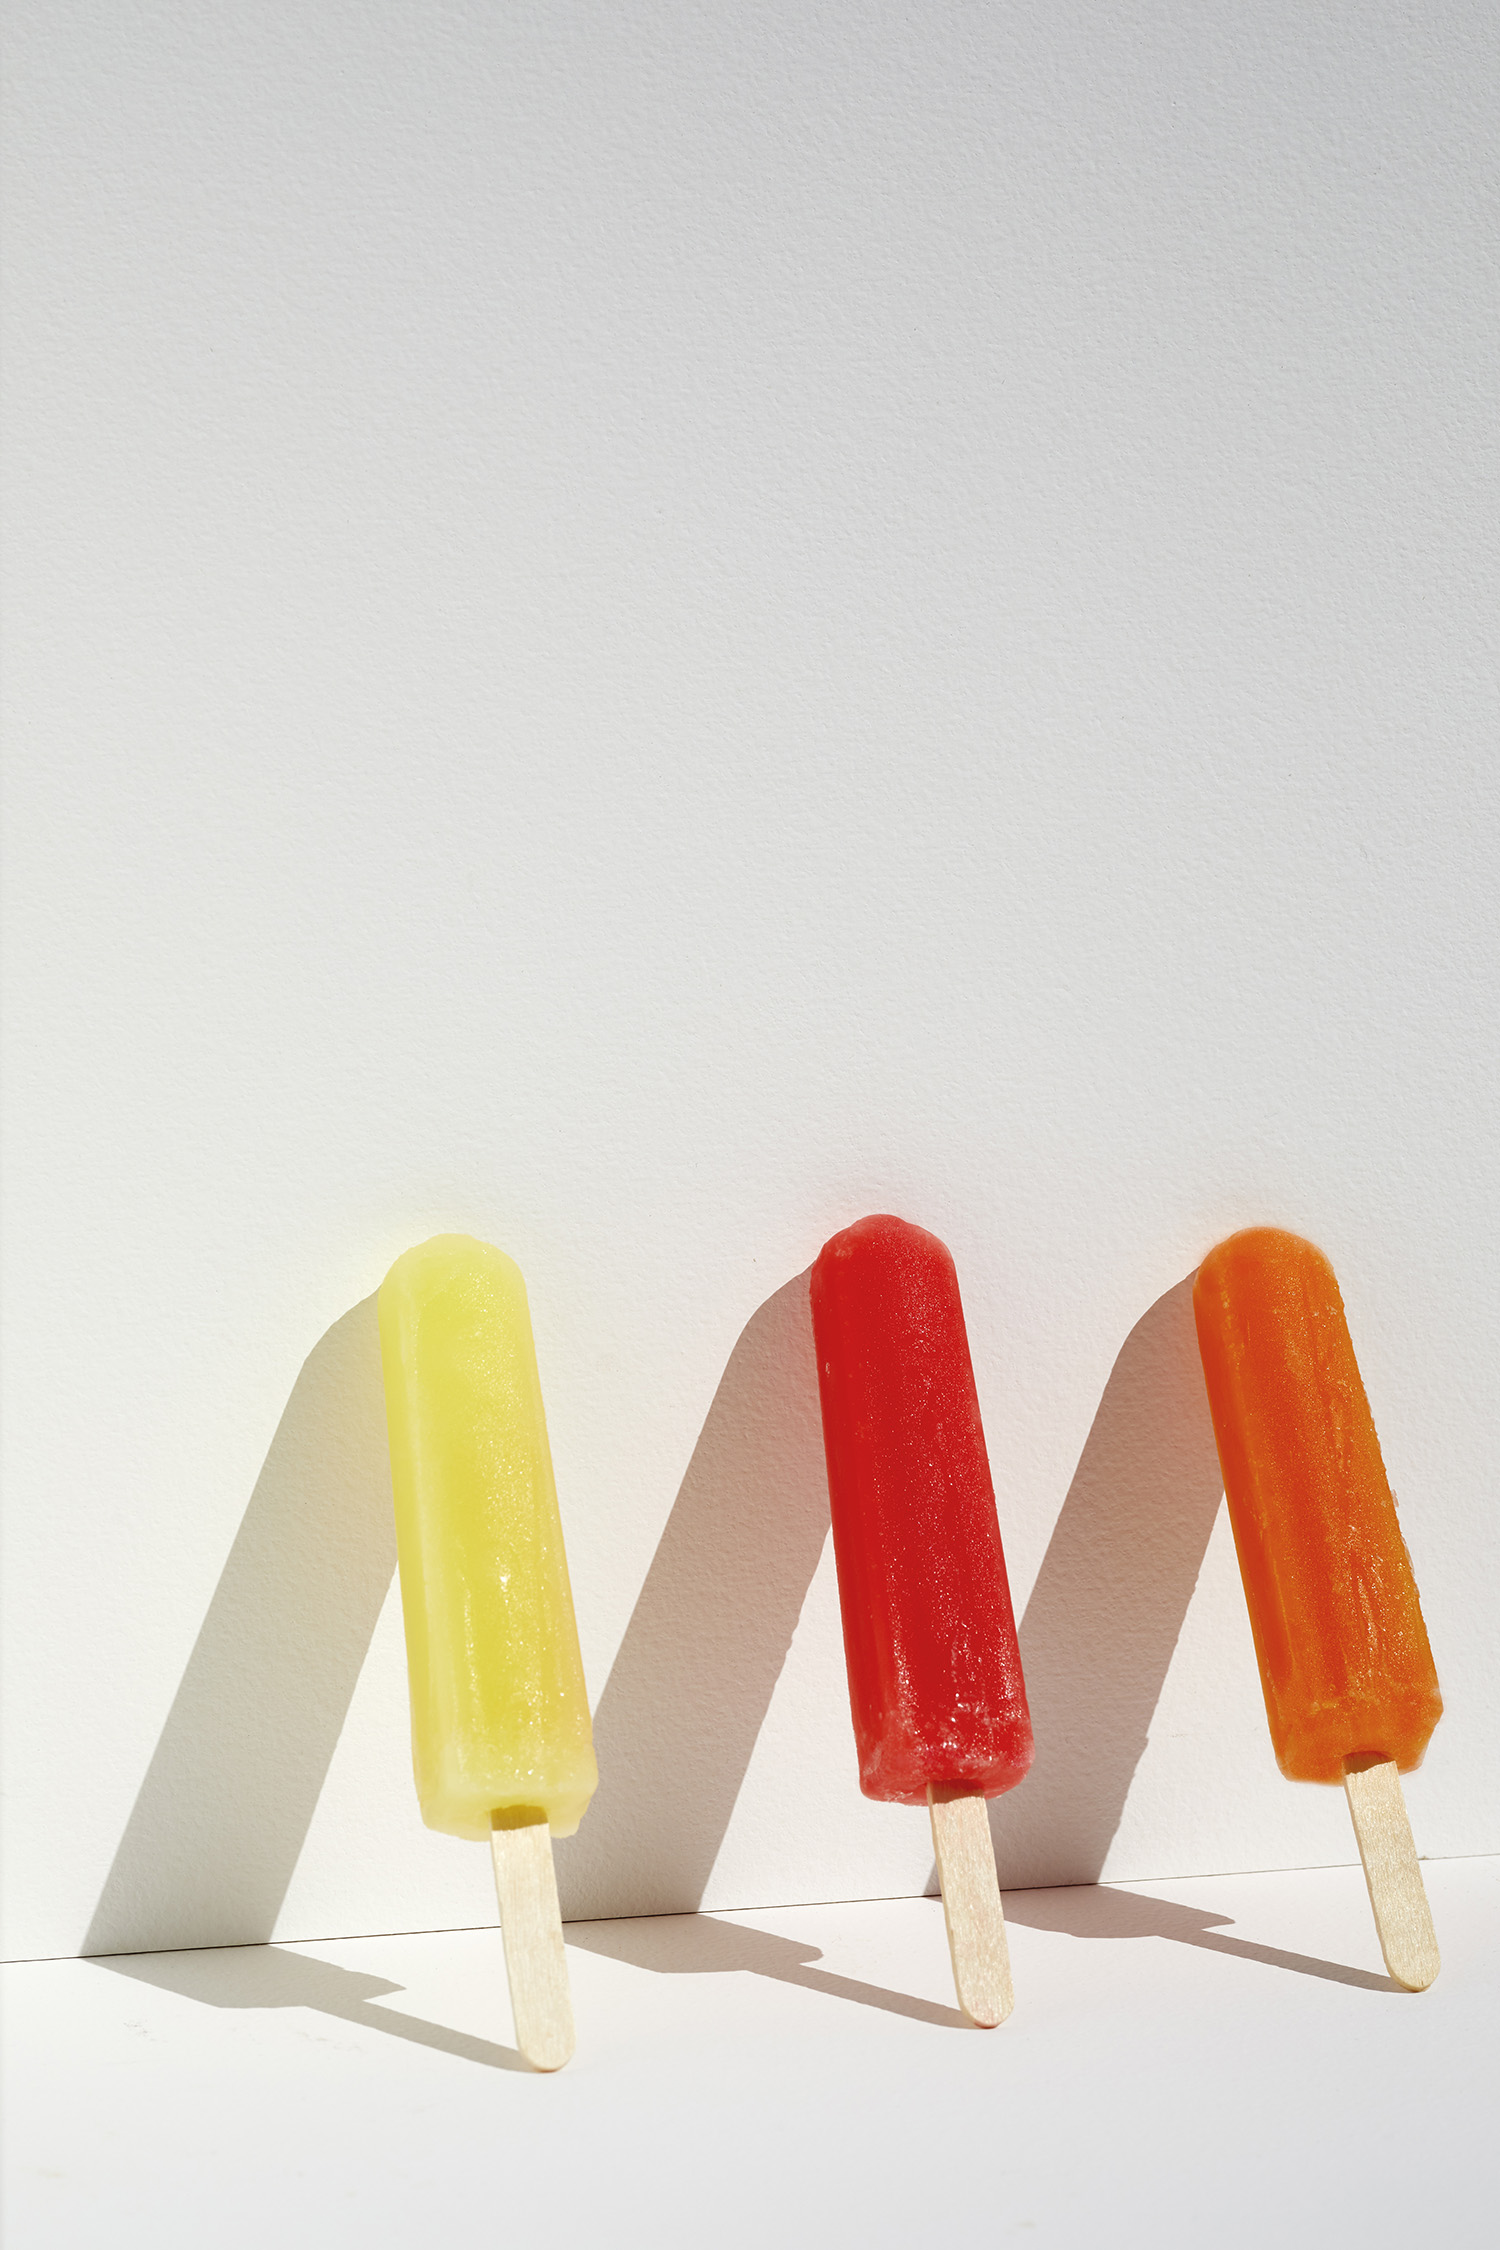 graphic popsicles